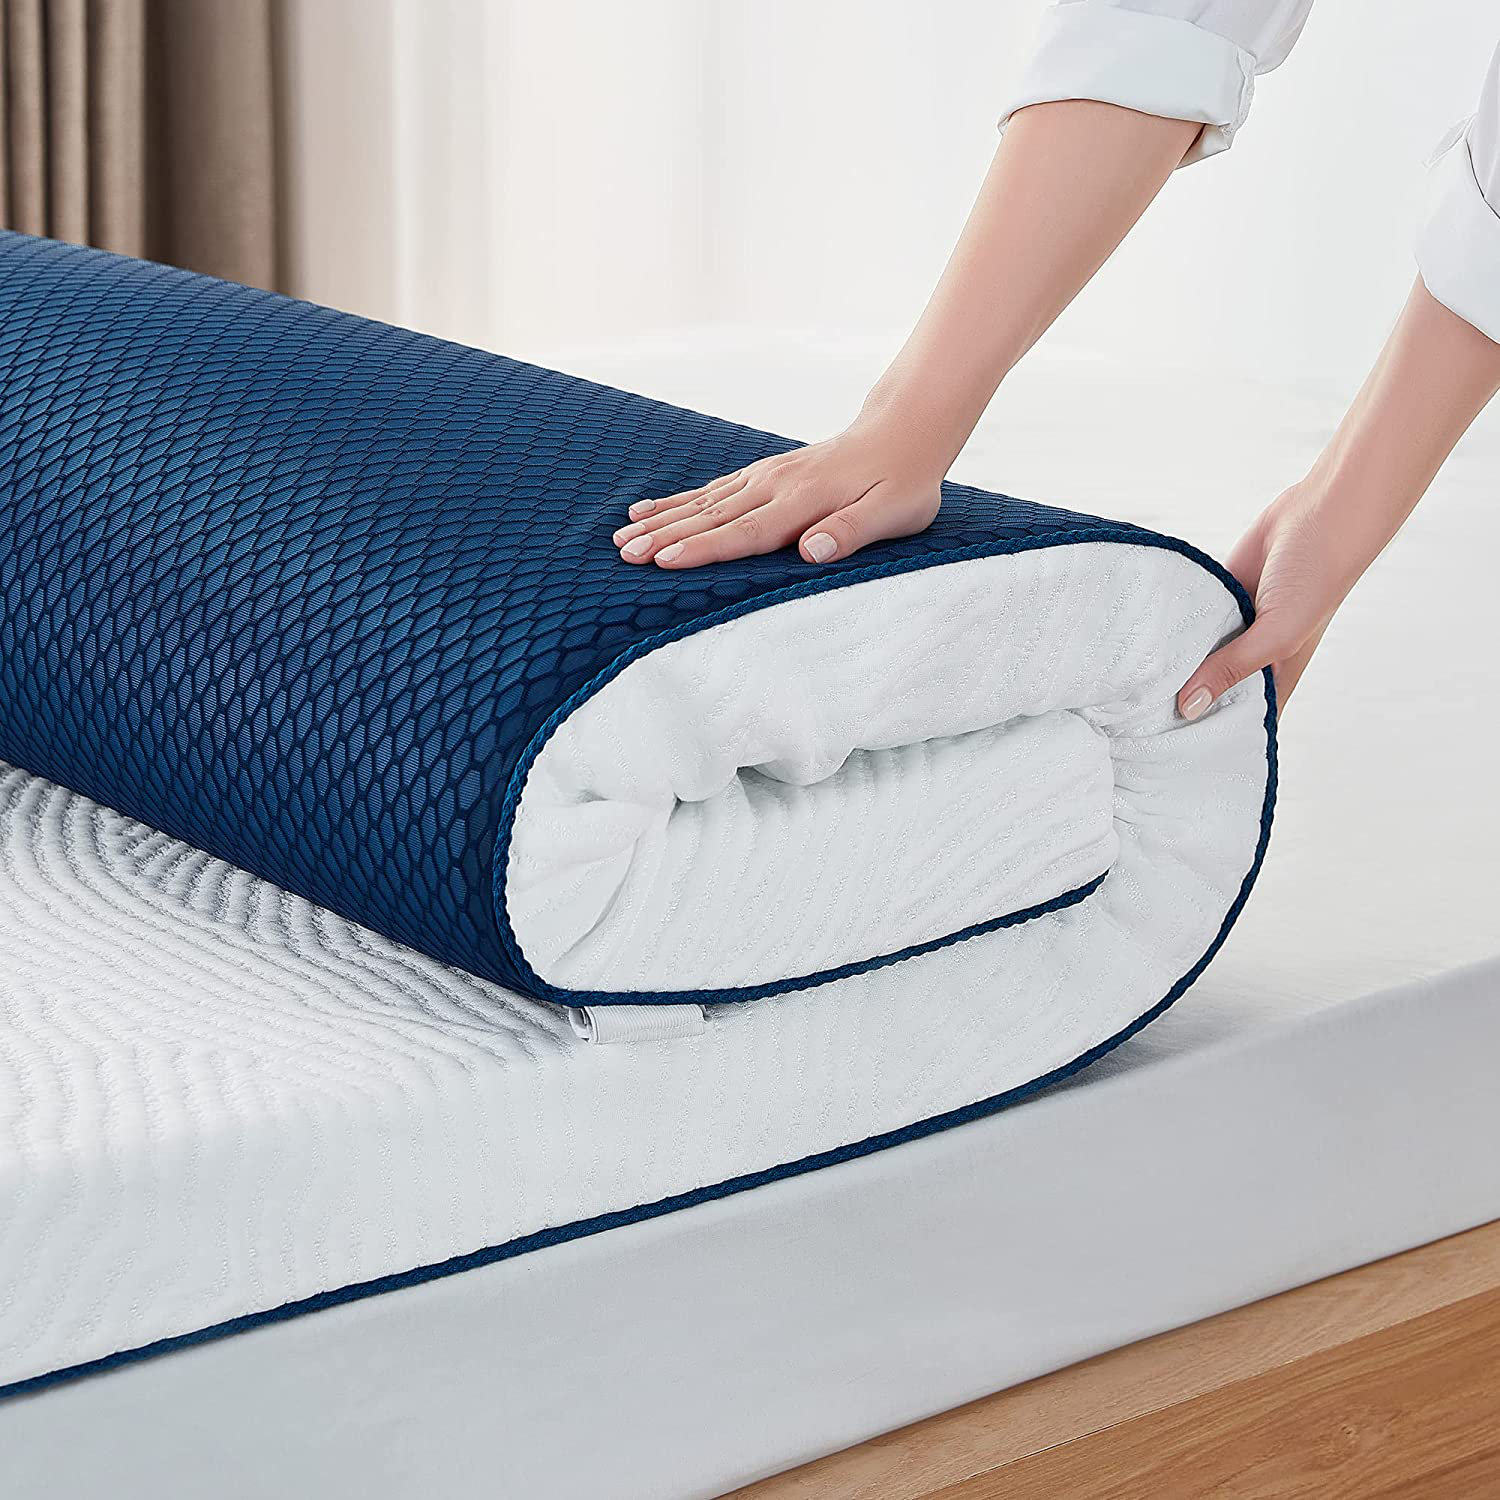 The Twillery Co.® 3 Down Alternative Mattress Topper & Reviews